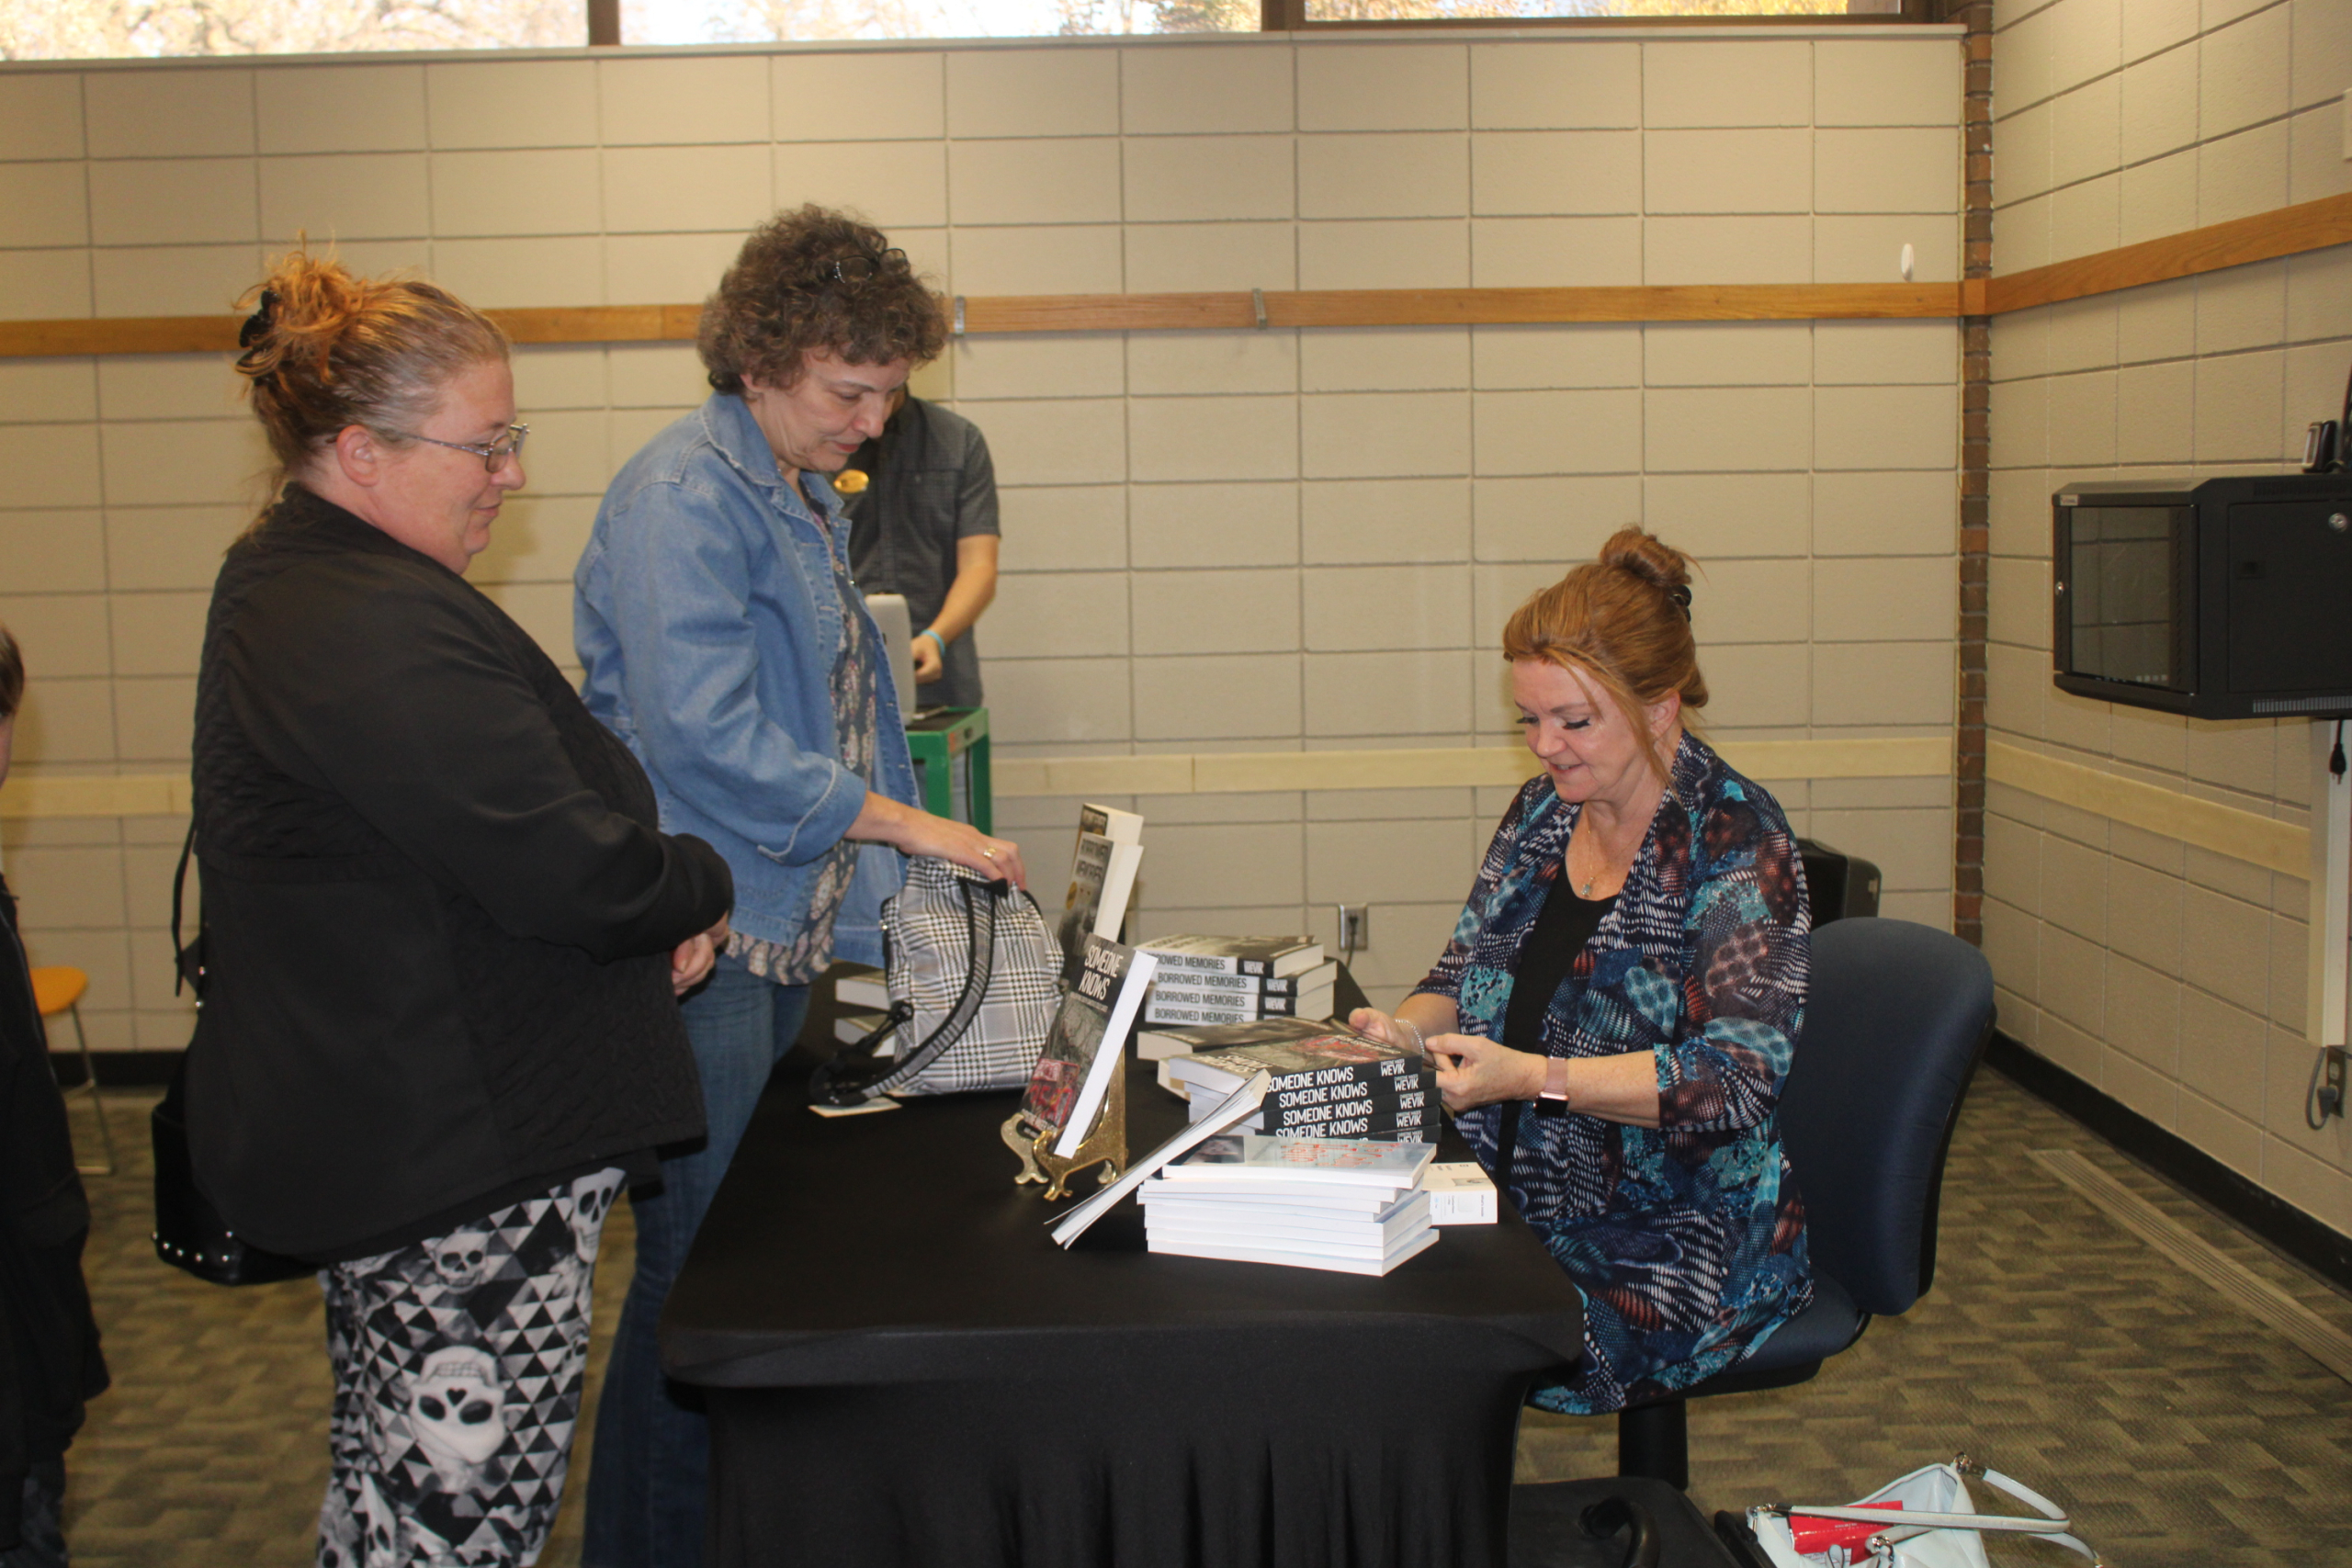 Wevik Book Signing at Library